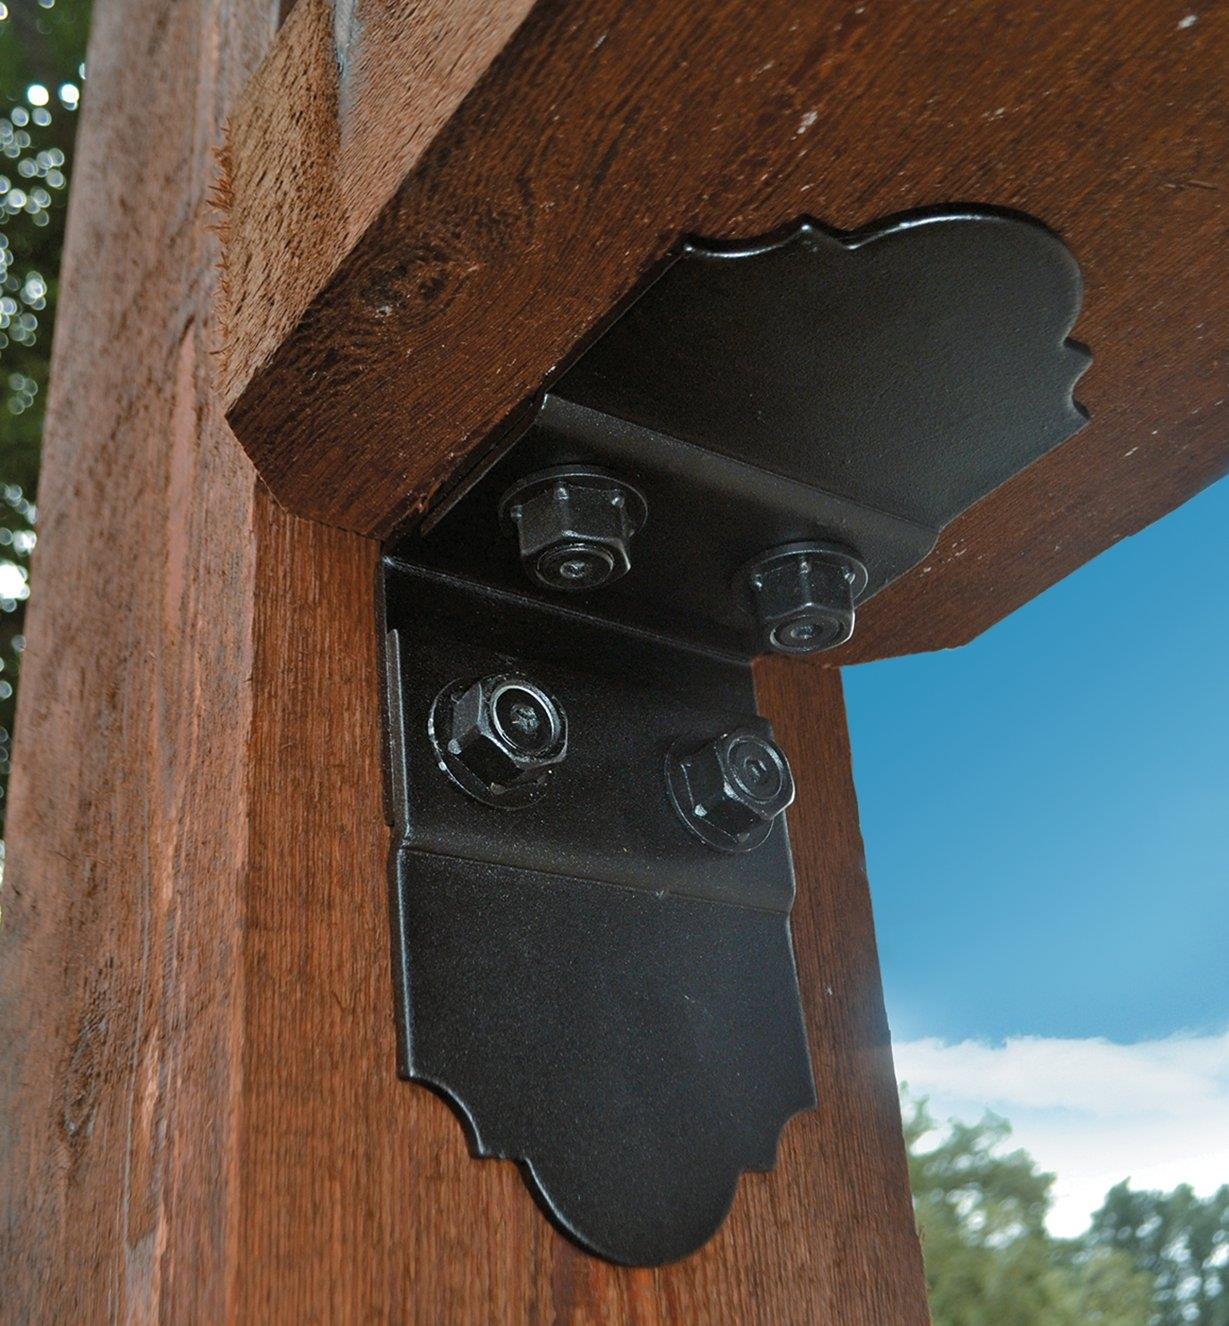 Flush-Mount Plate installed on an outdoor structure